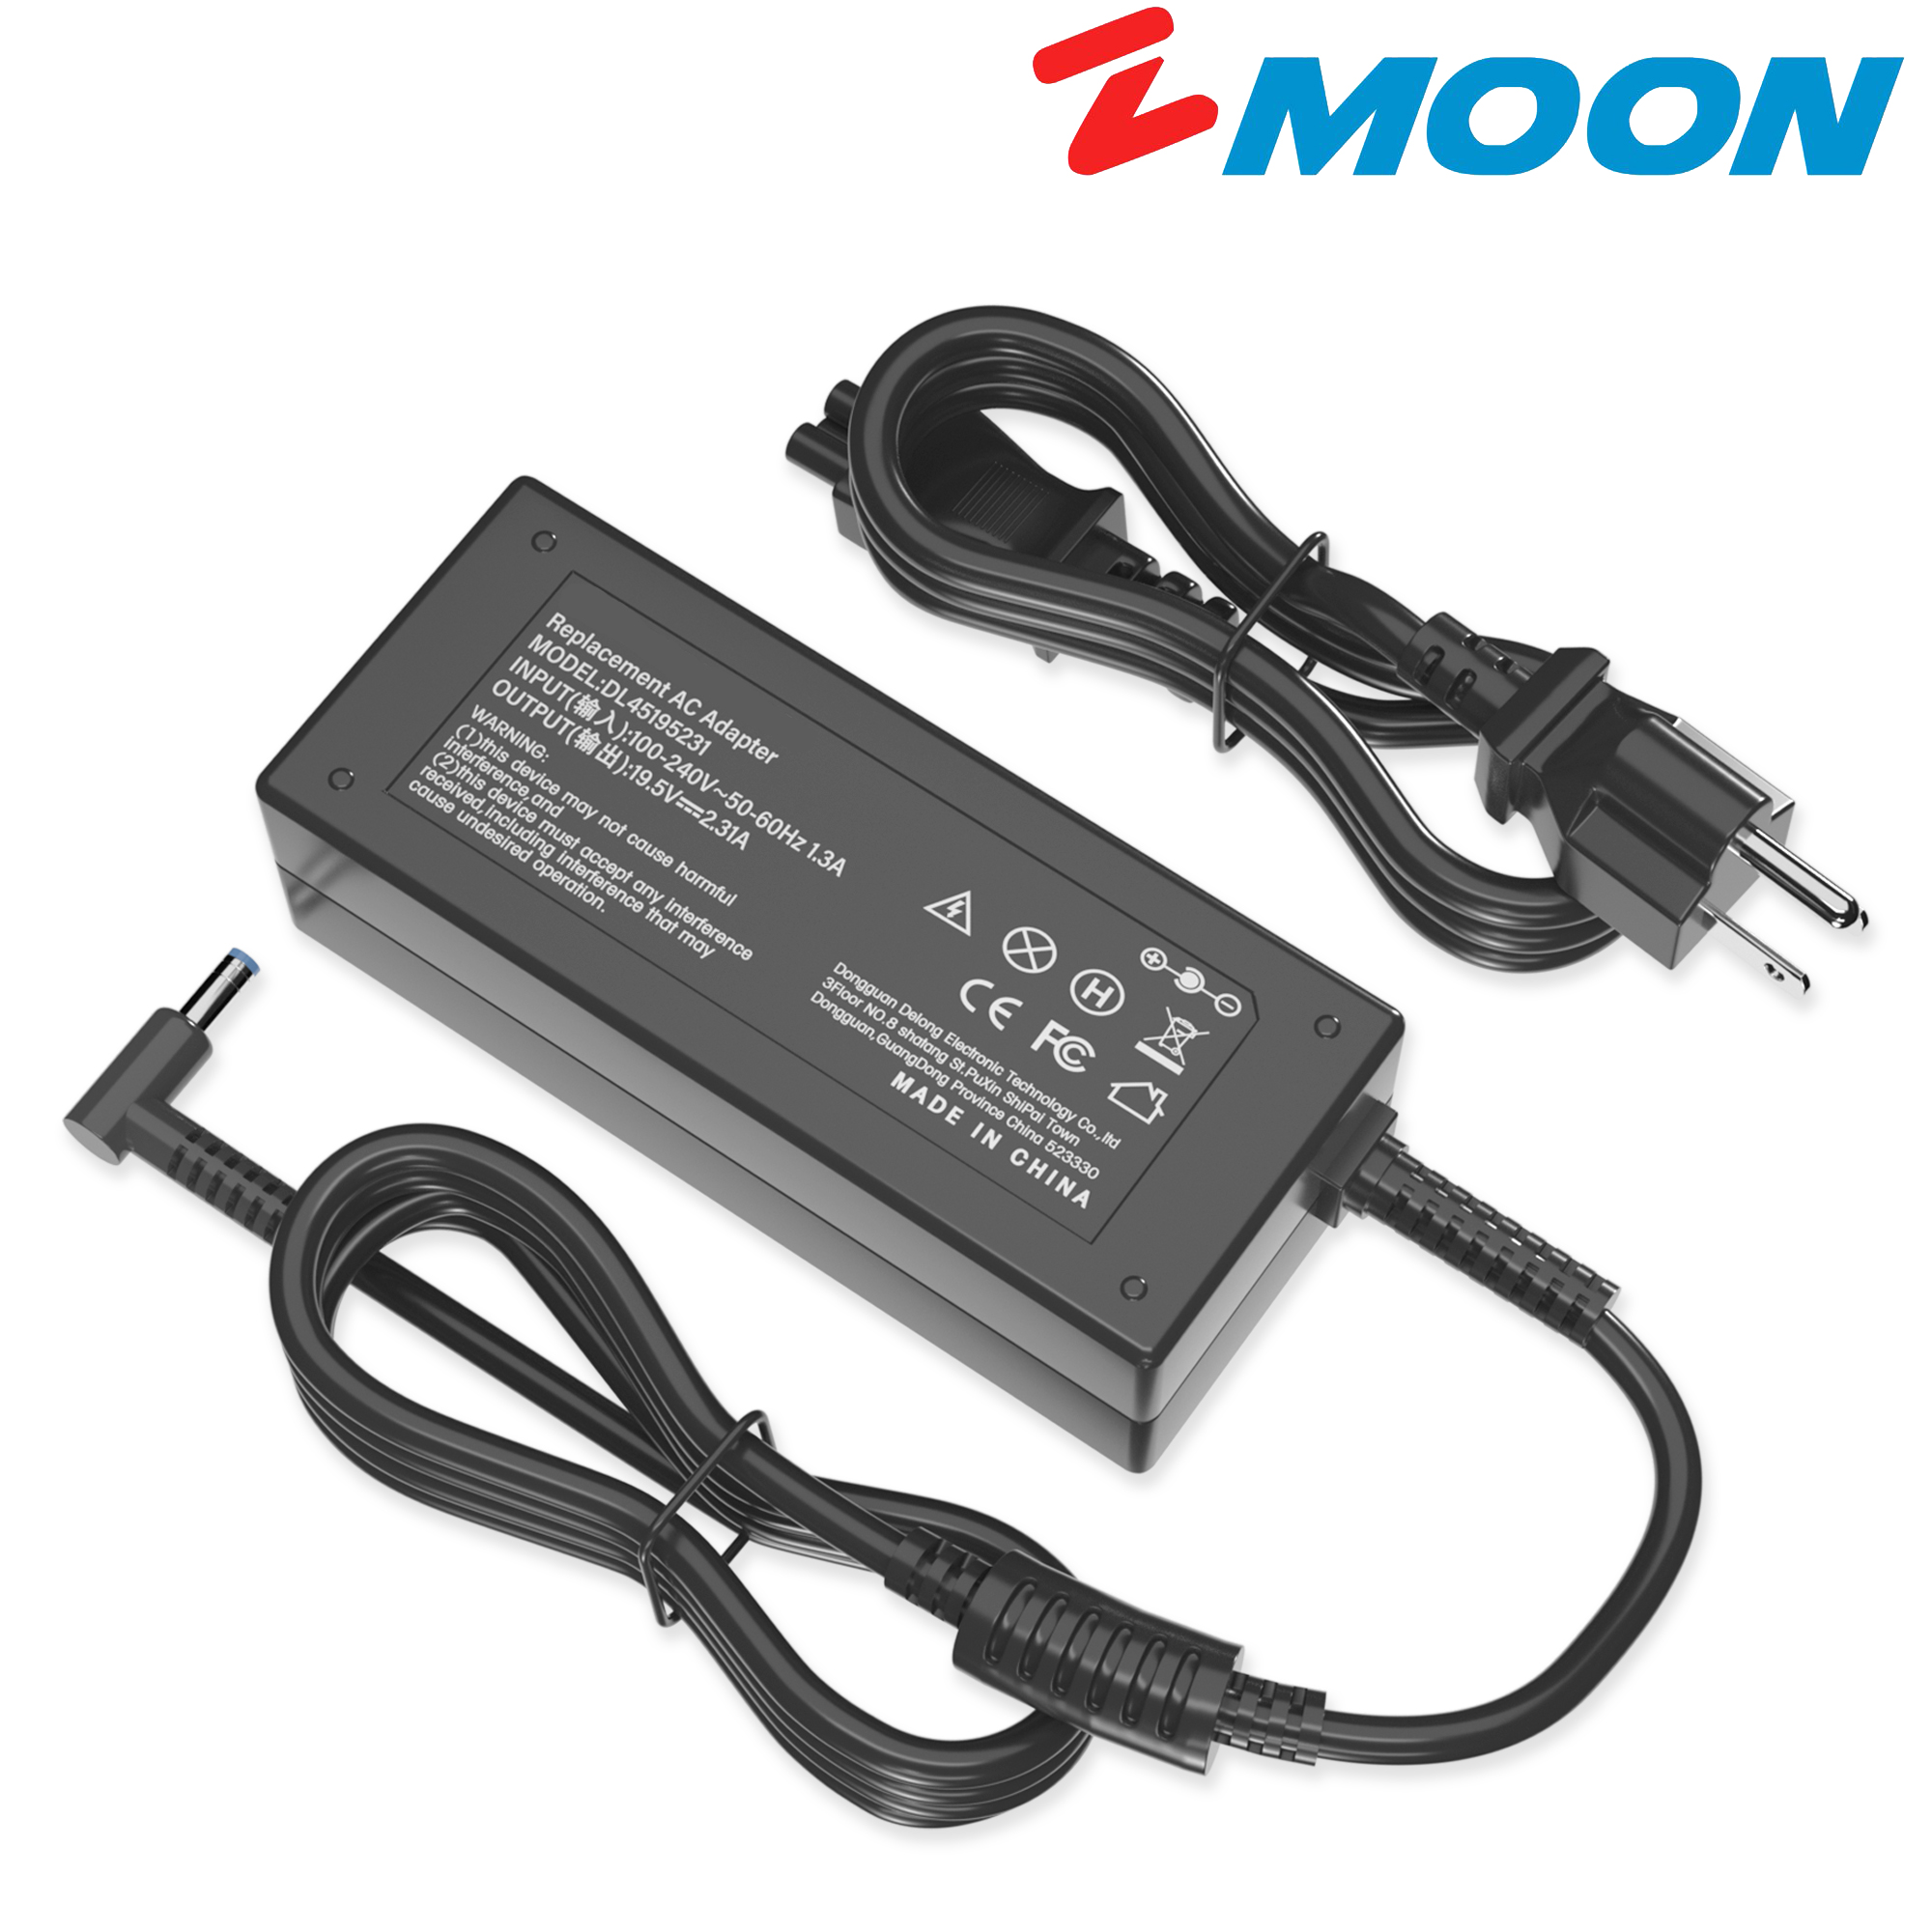 19.5V 2.31A 45W AC Power Laptop Adapter Supply Charger Cord for HP pavilion X360 M3 11 13 15 Folio 1040 G1 G2 G3 HSTNN-CA40 7400015-001 740015-003 - image 1 of 6